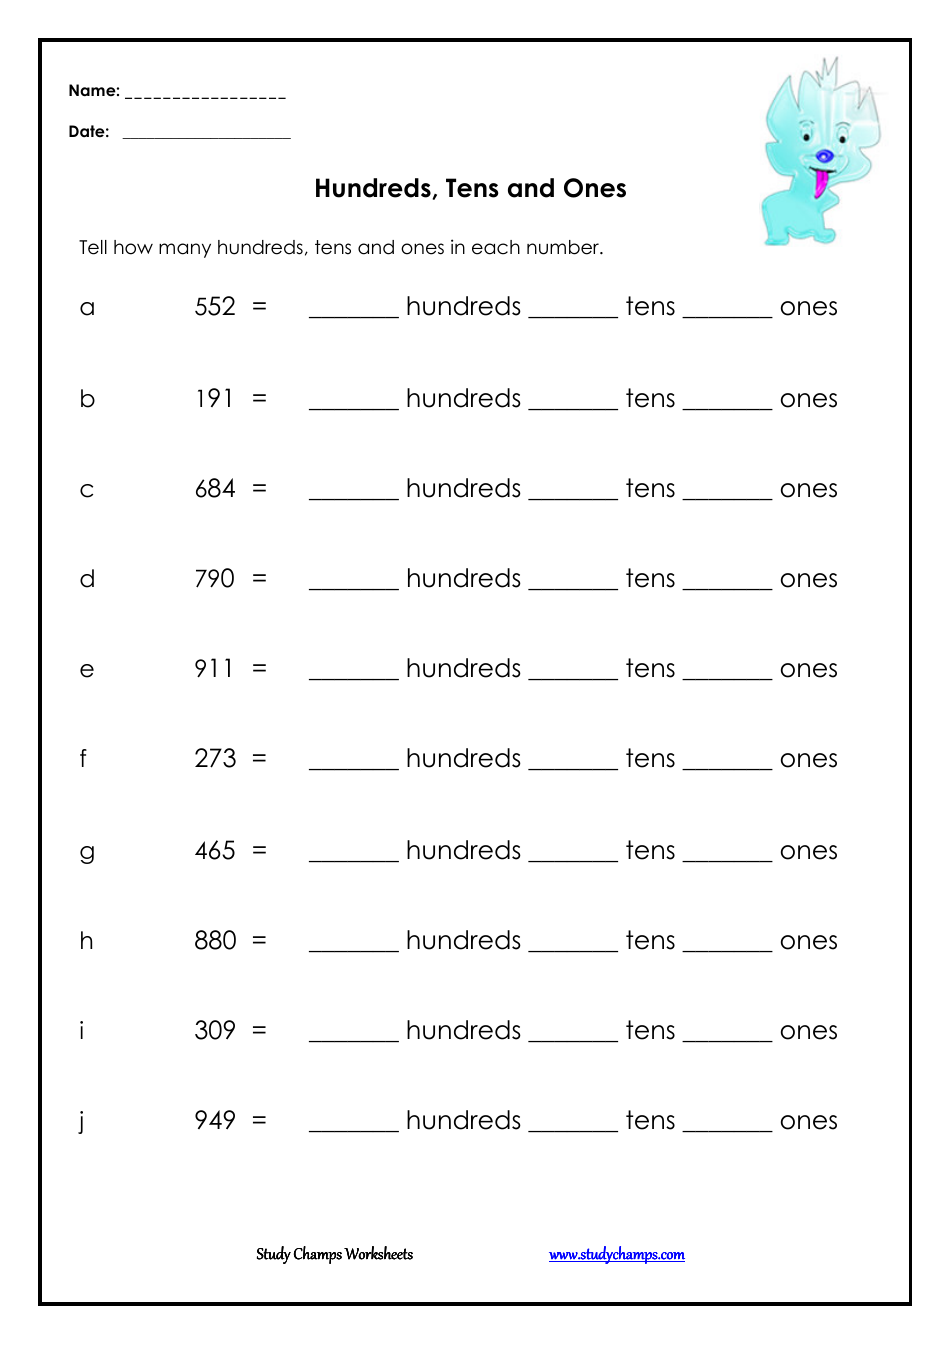 hundreds-tens-and-ones-worksheet-with-answer-key-download-printable